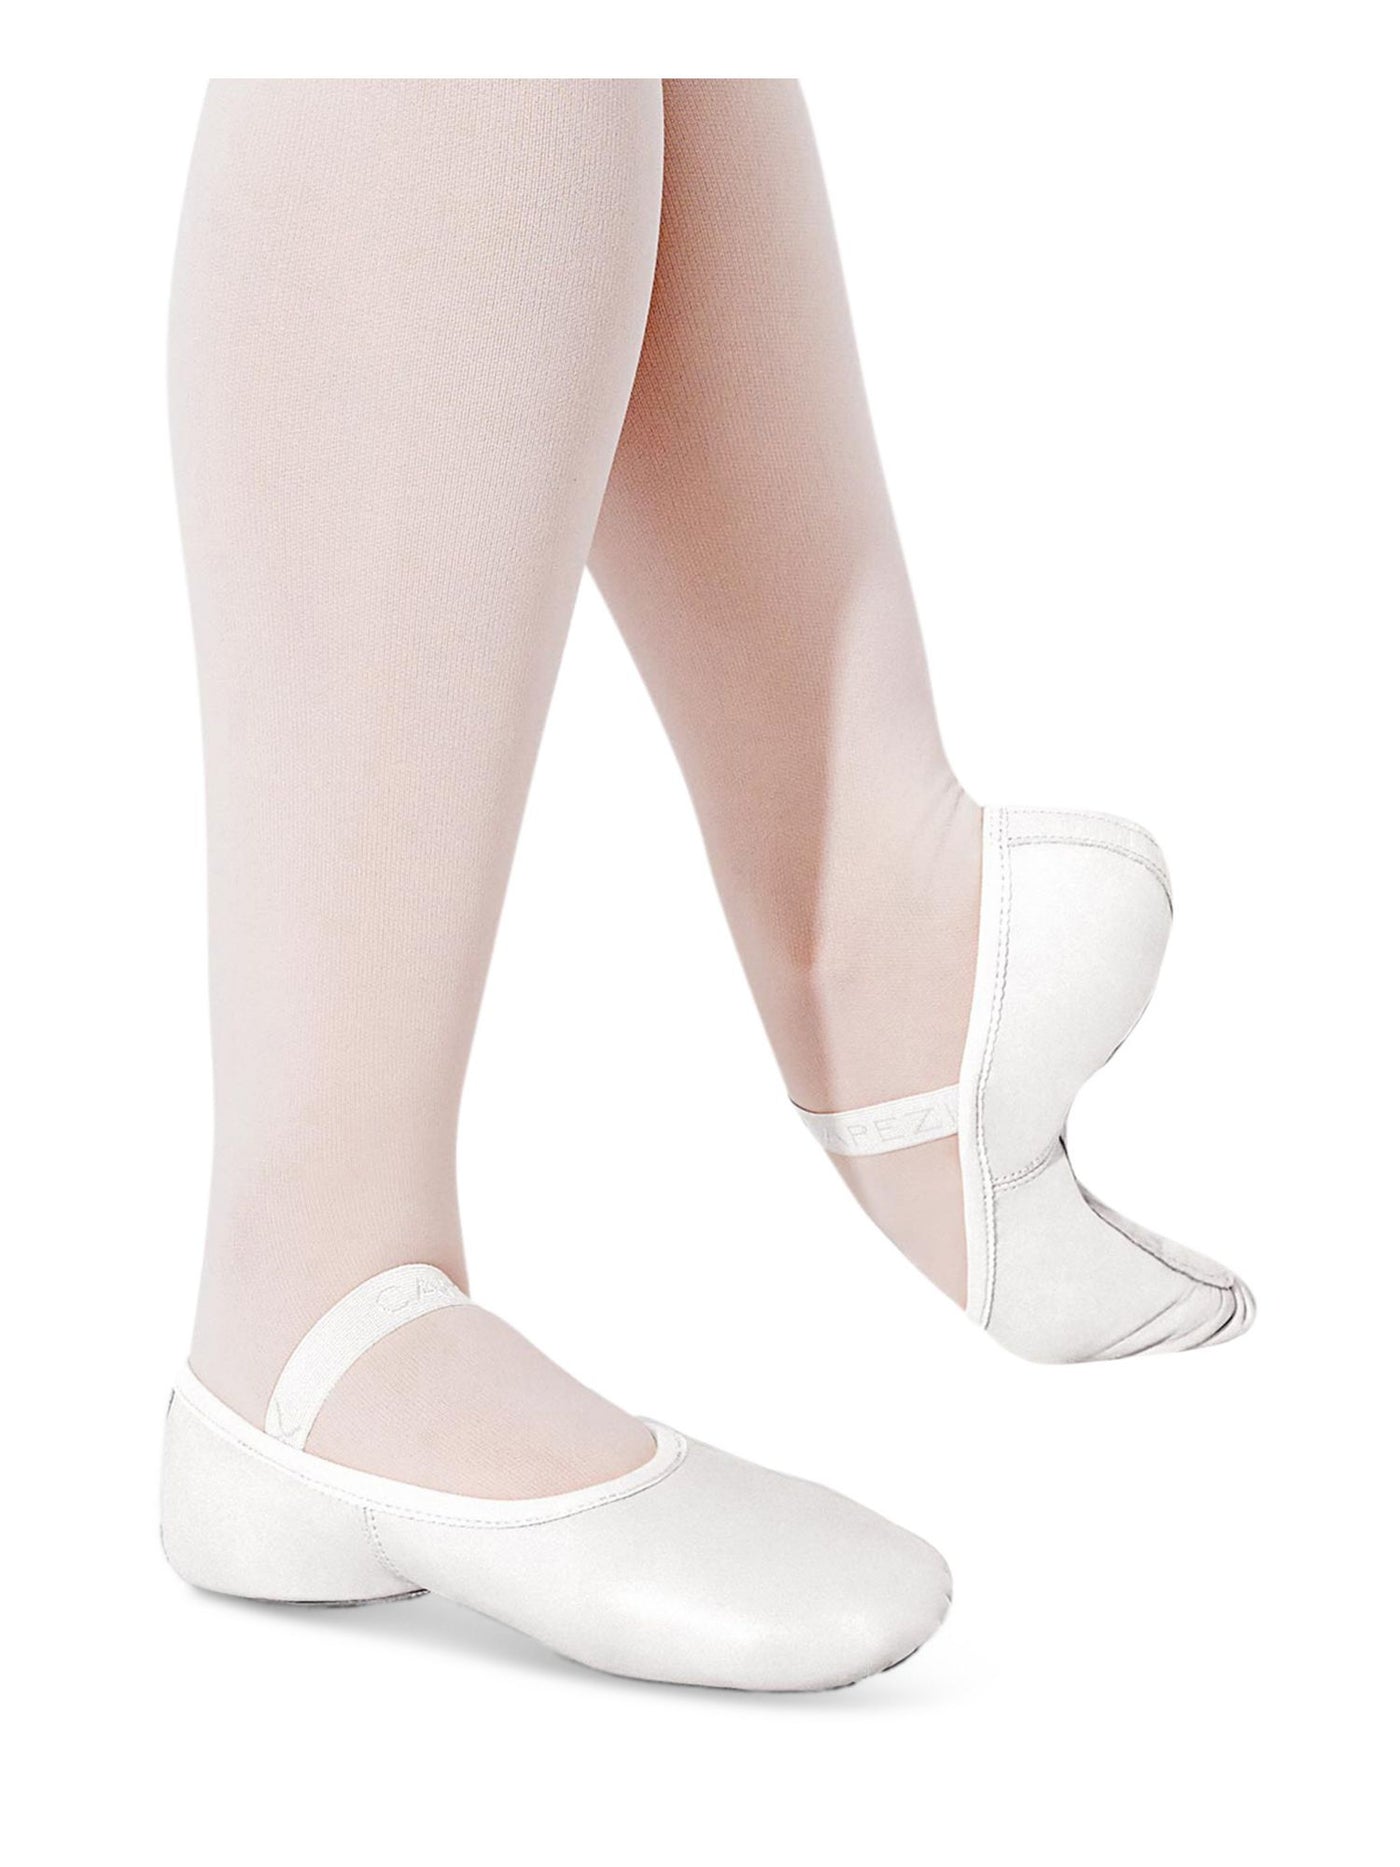 CAPEZIO Womens White Stretch Comfort Lily Round Toe Slip On Leather Ballet Flats 7 M